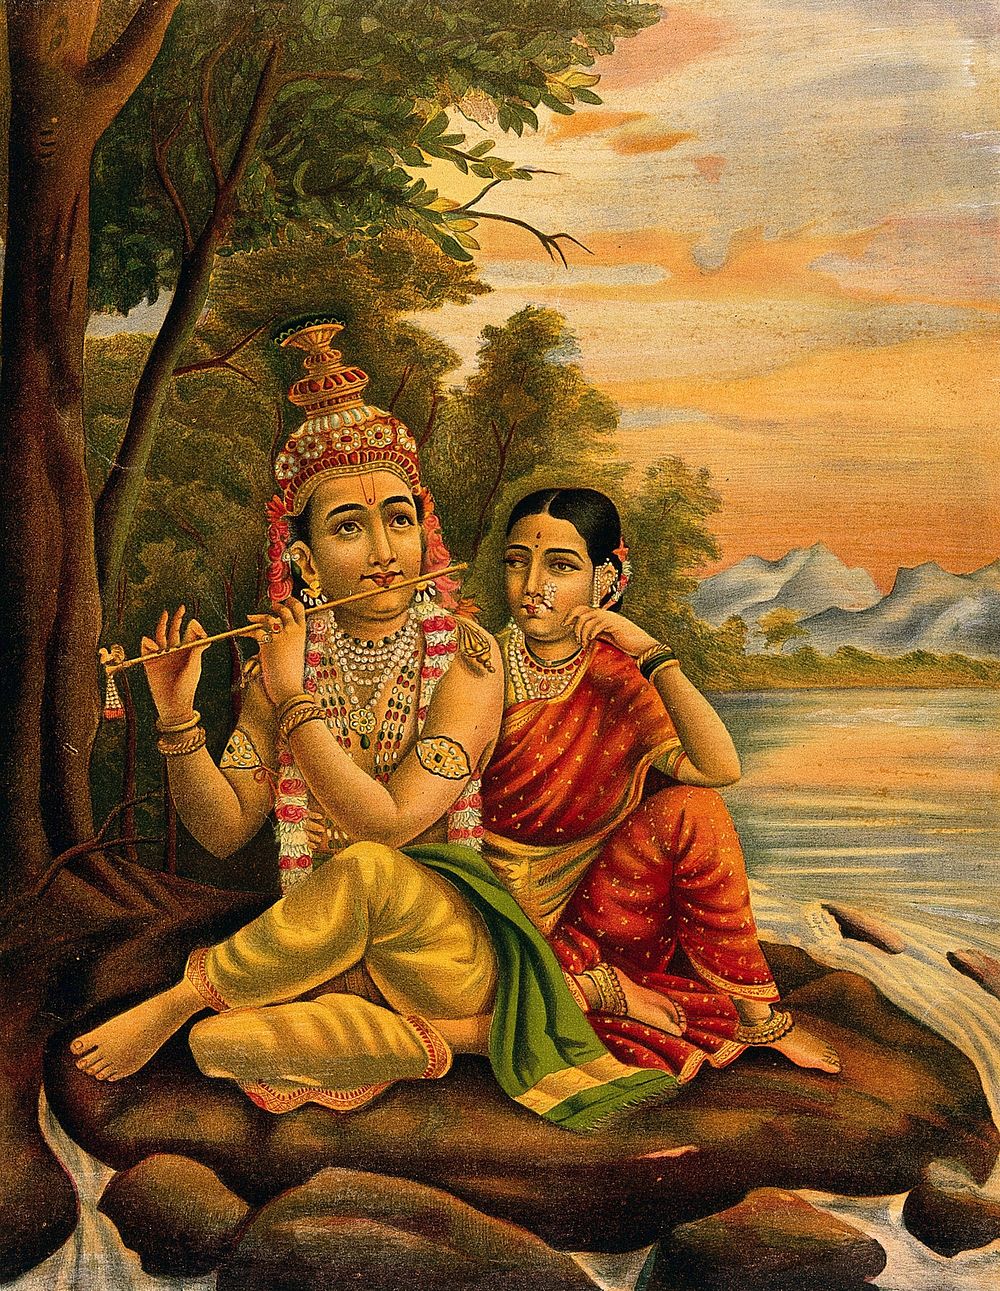 Radha listening to Krishna's flute playing seated by a shoreline. Chromolithograph.